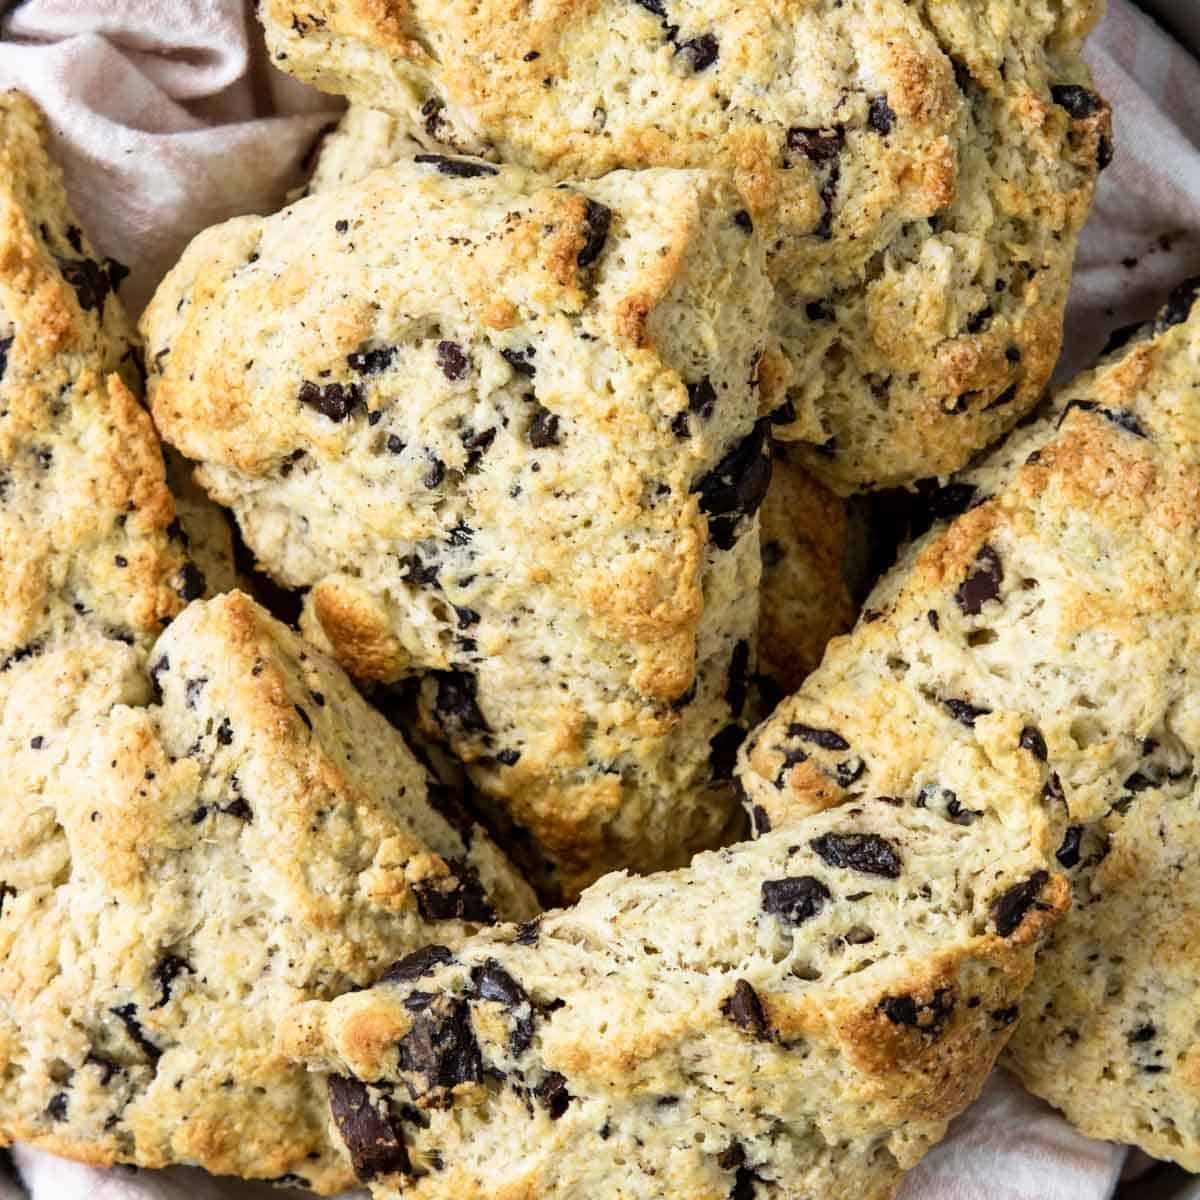 Chocolate chips scones in a basket